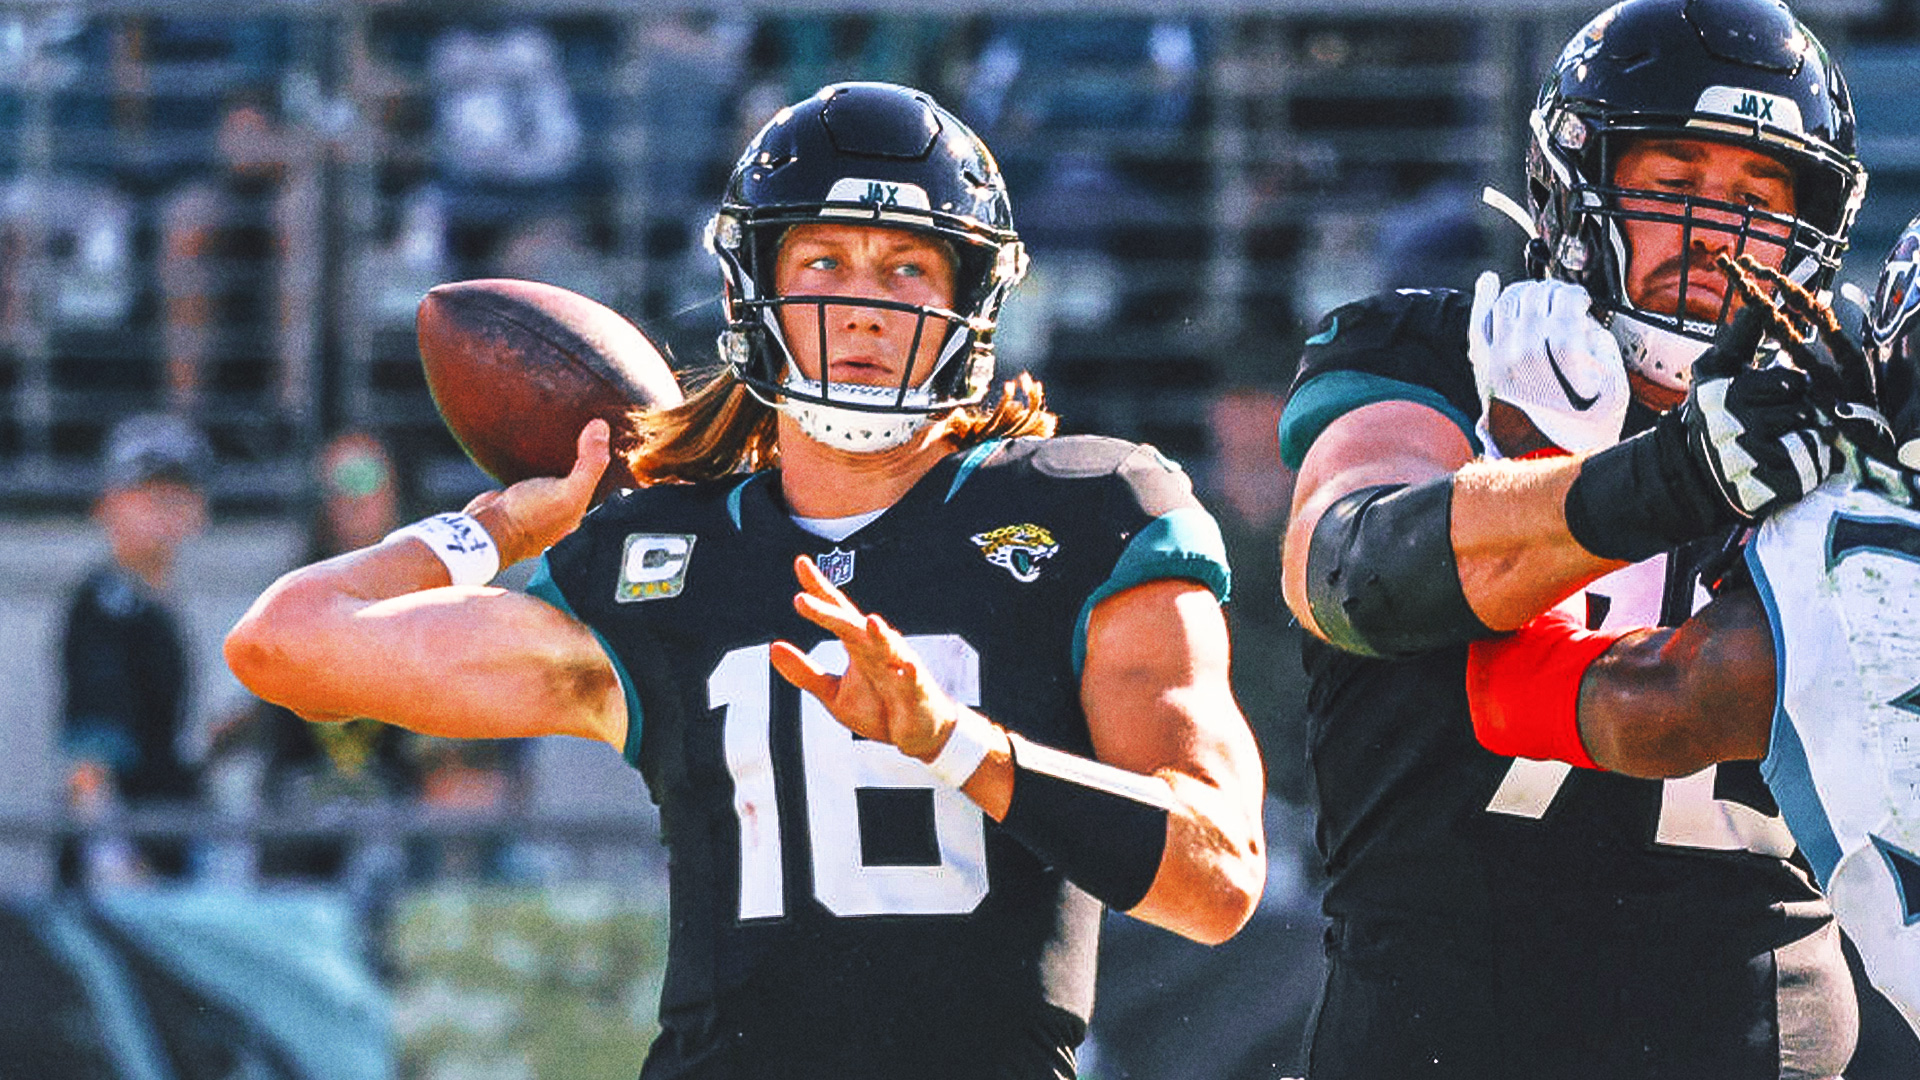 Jaguars maintain control of AFC South by cruising past Titans 34-14